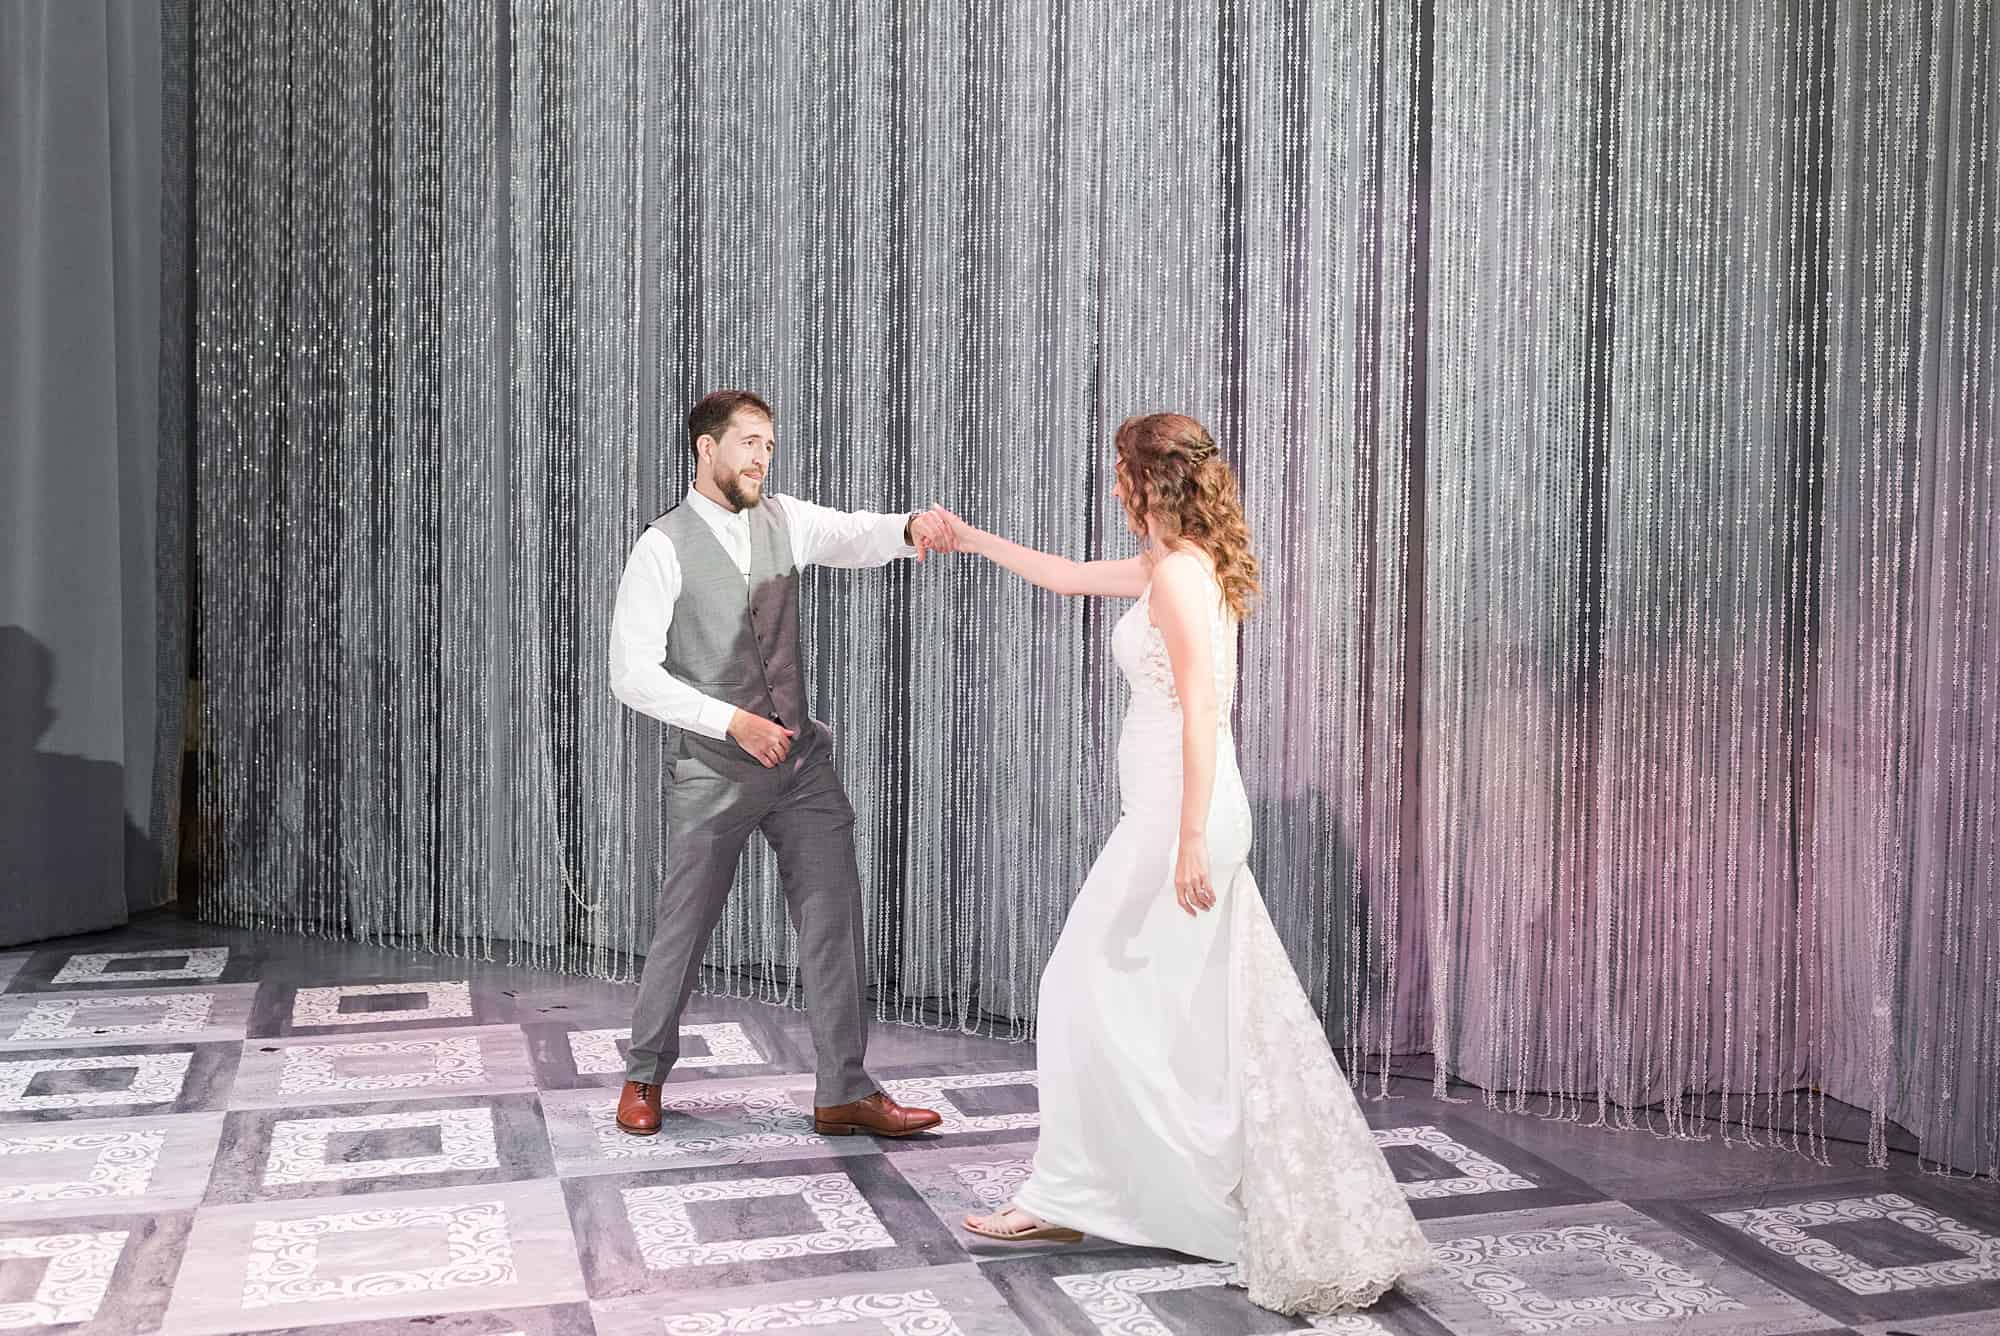 Bride and groom share their first dance no the stage at the Chanhassen Dinner Theater